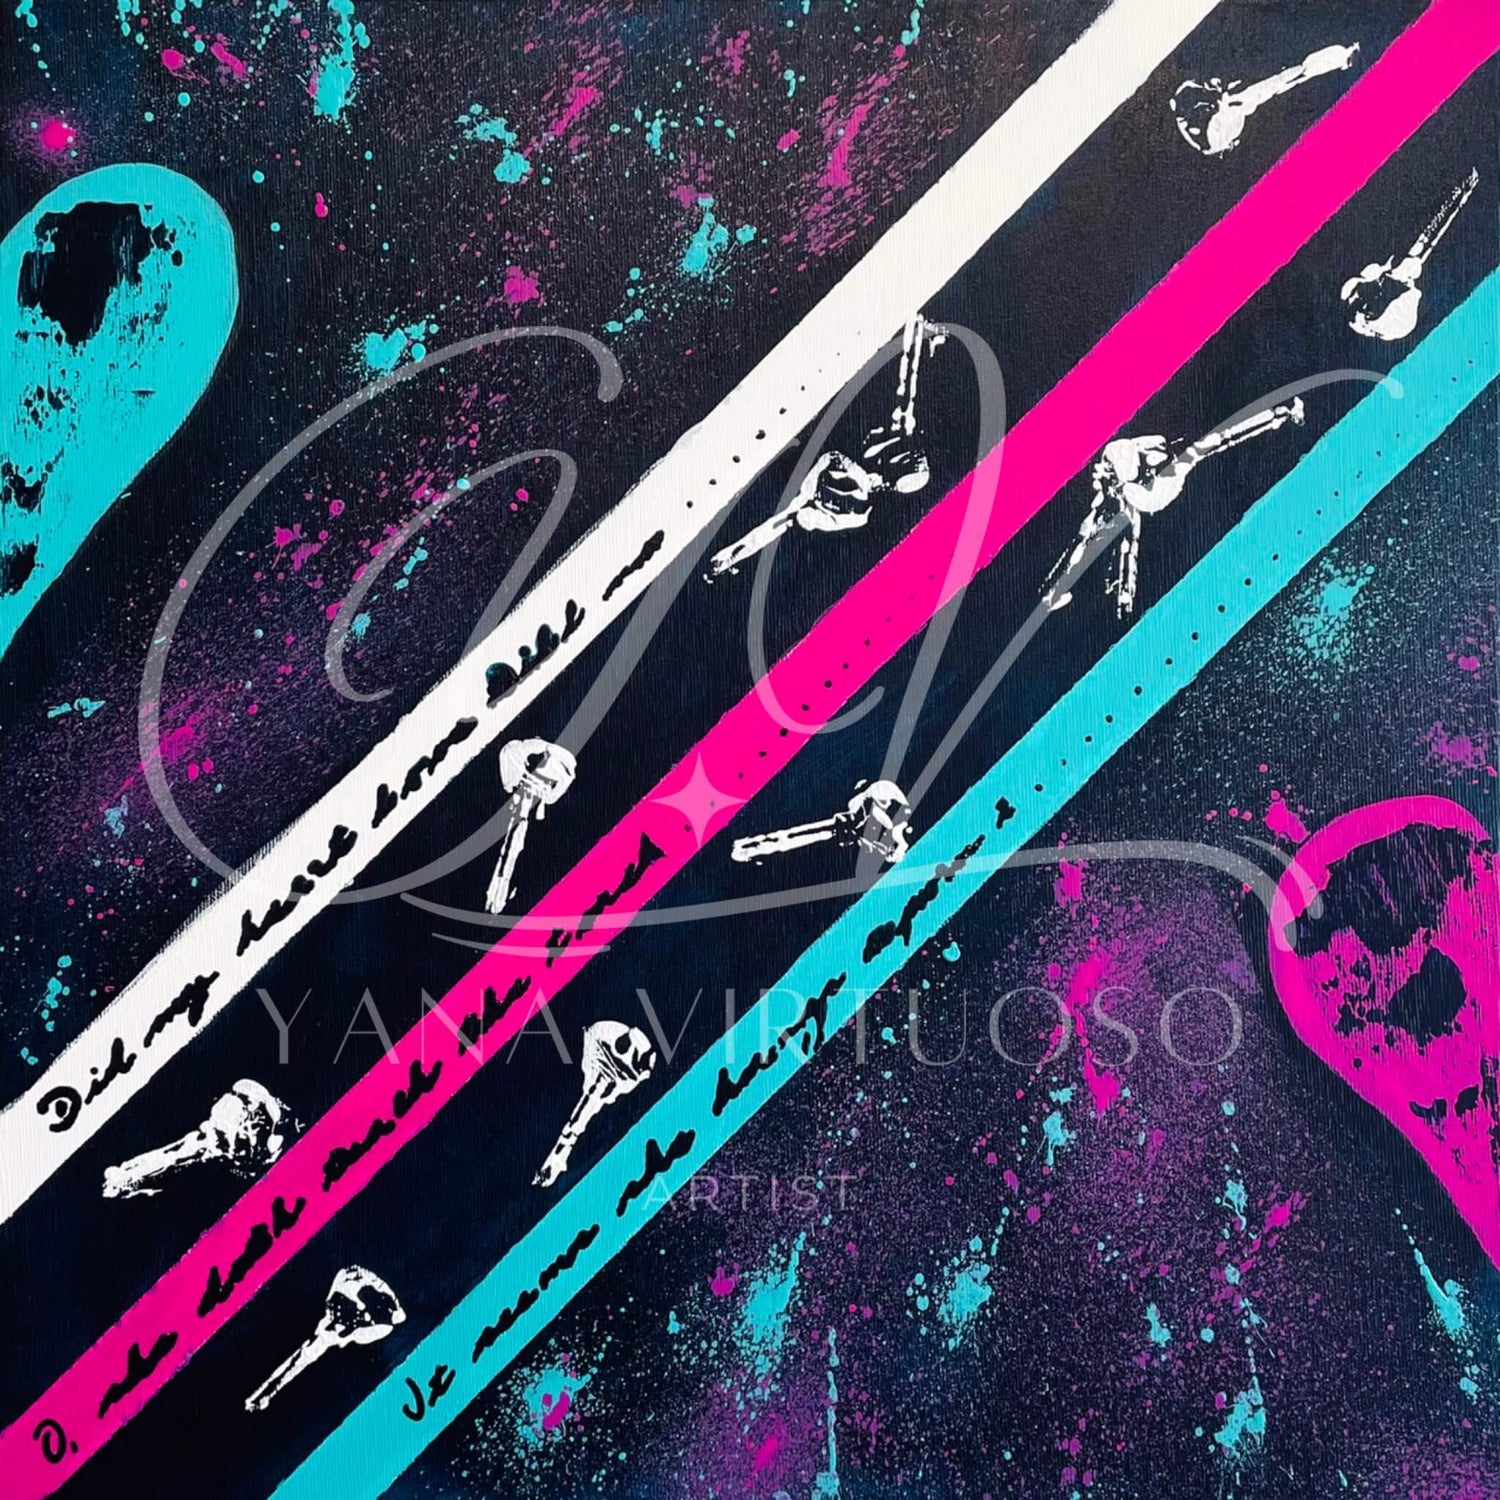 Close-up view of "The Key to Love" showcasing detailed brushstrokes and splashes, highlighting the vibrant interplay of pink and turquoise colors.